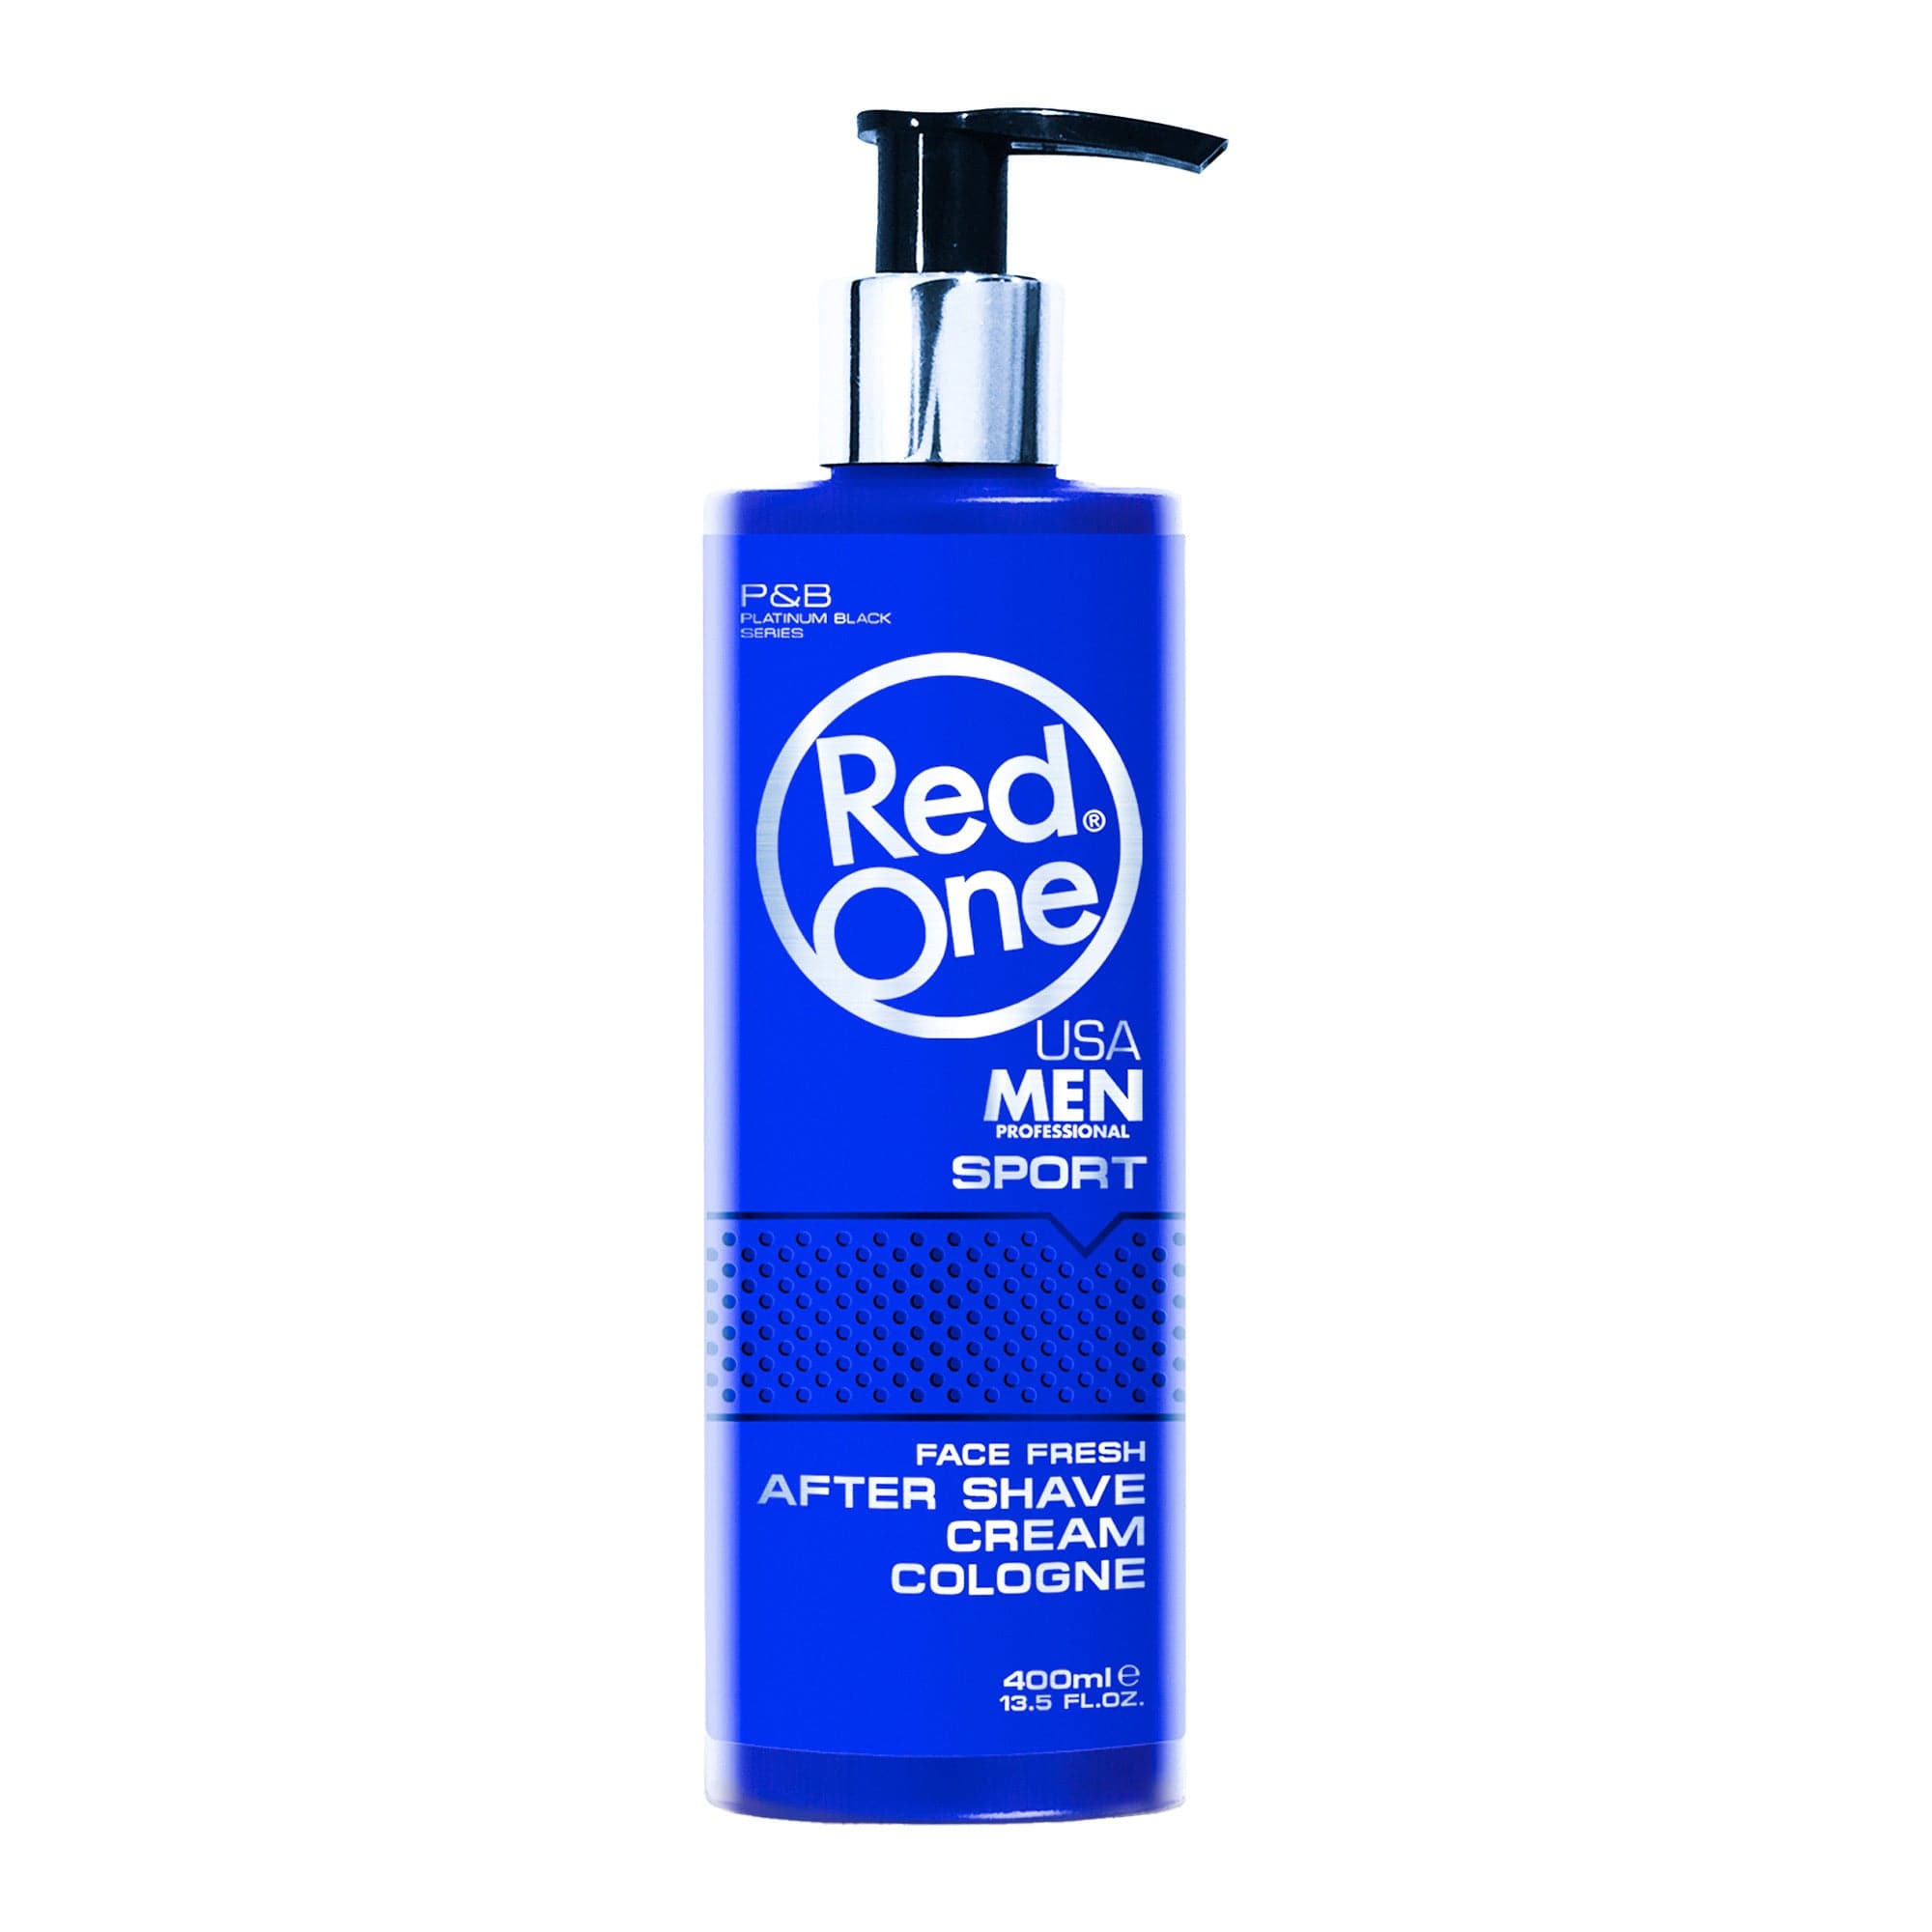 Redone - After Shave Cream Cologne Sport 400ml